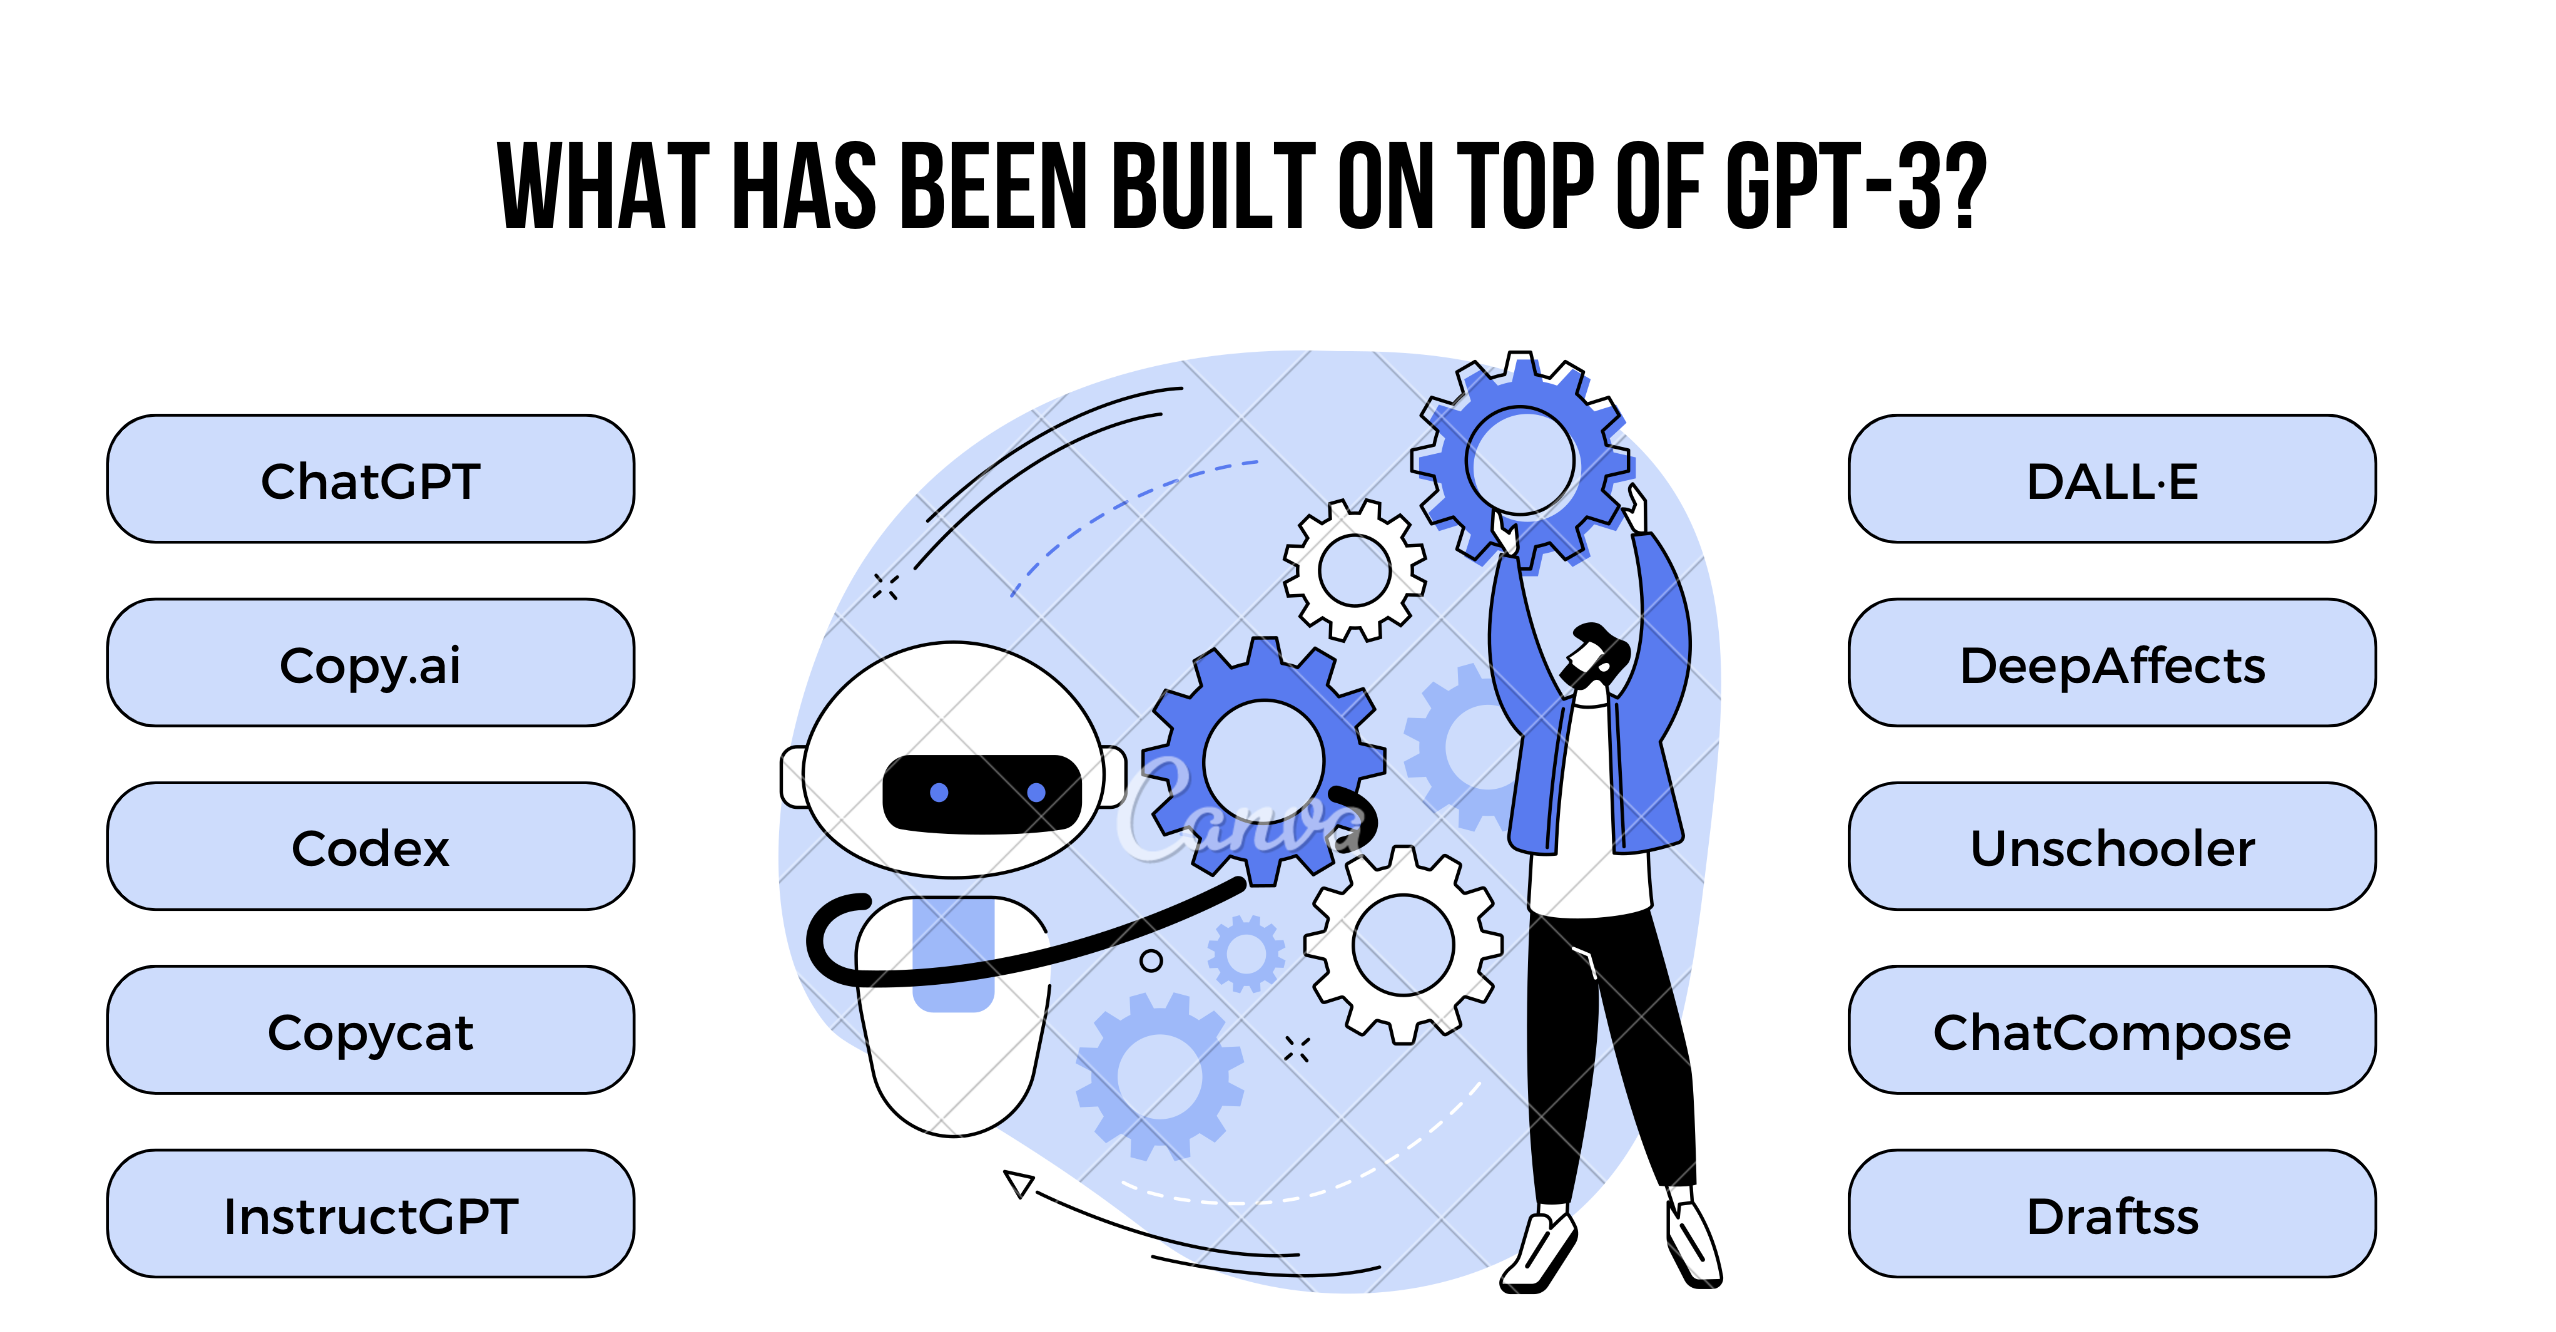 What has been built on top of GPT-3